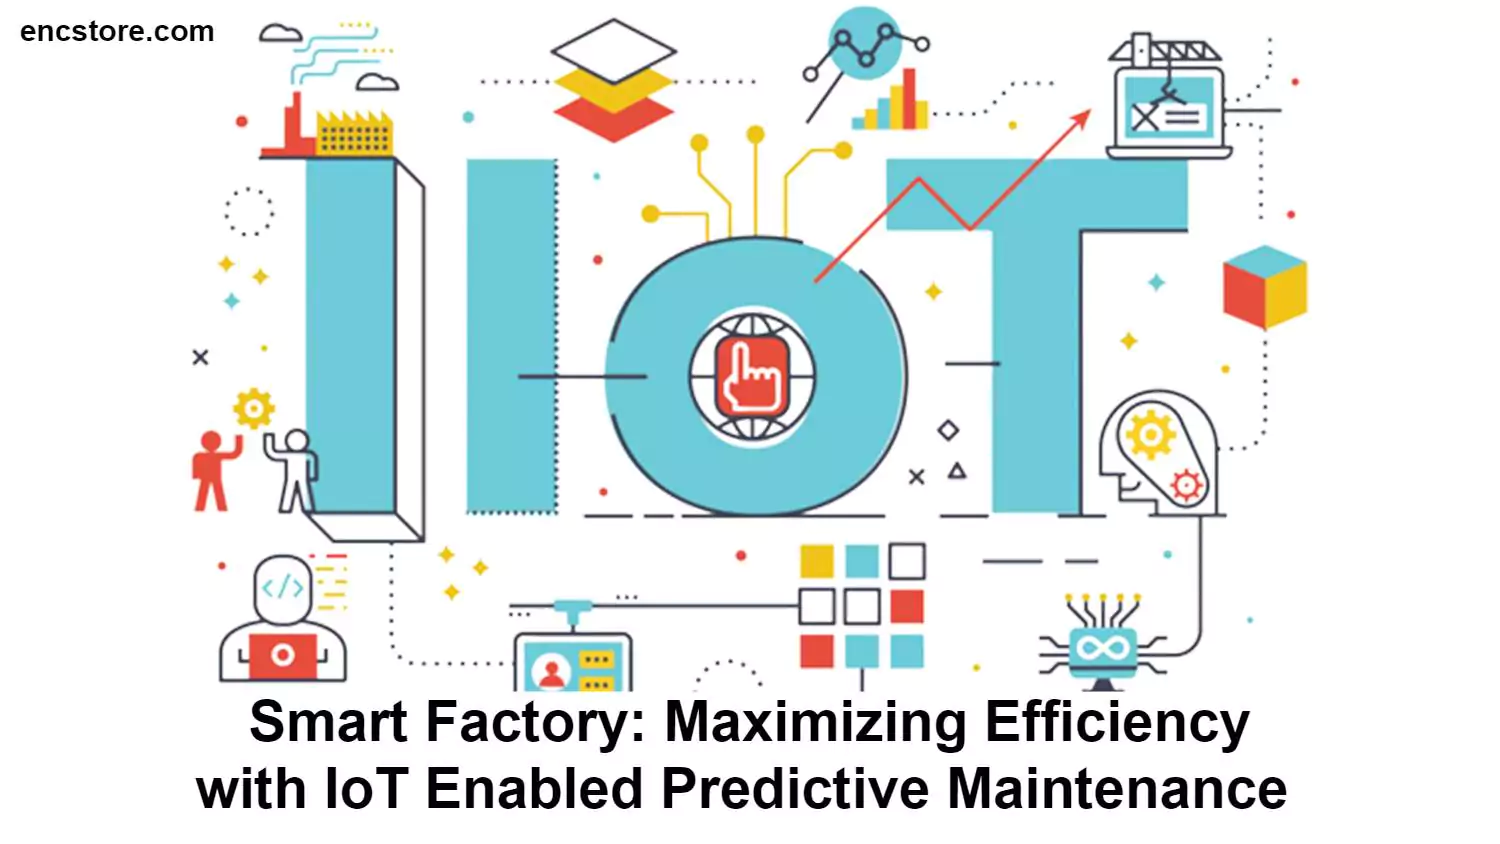 Maximizing Efficiency with IoT Enabled Predictive Maintenance 